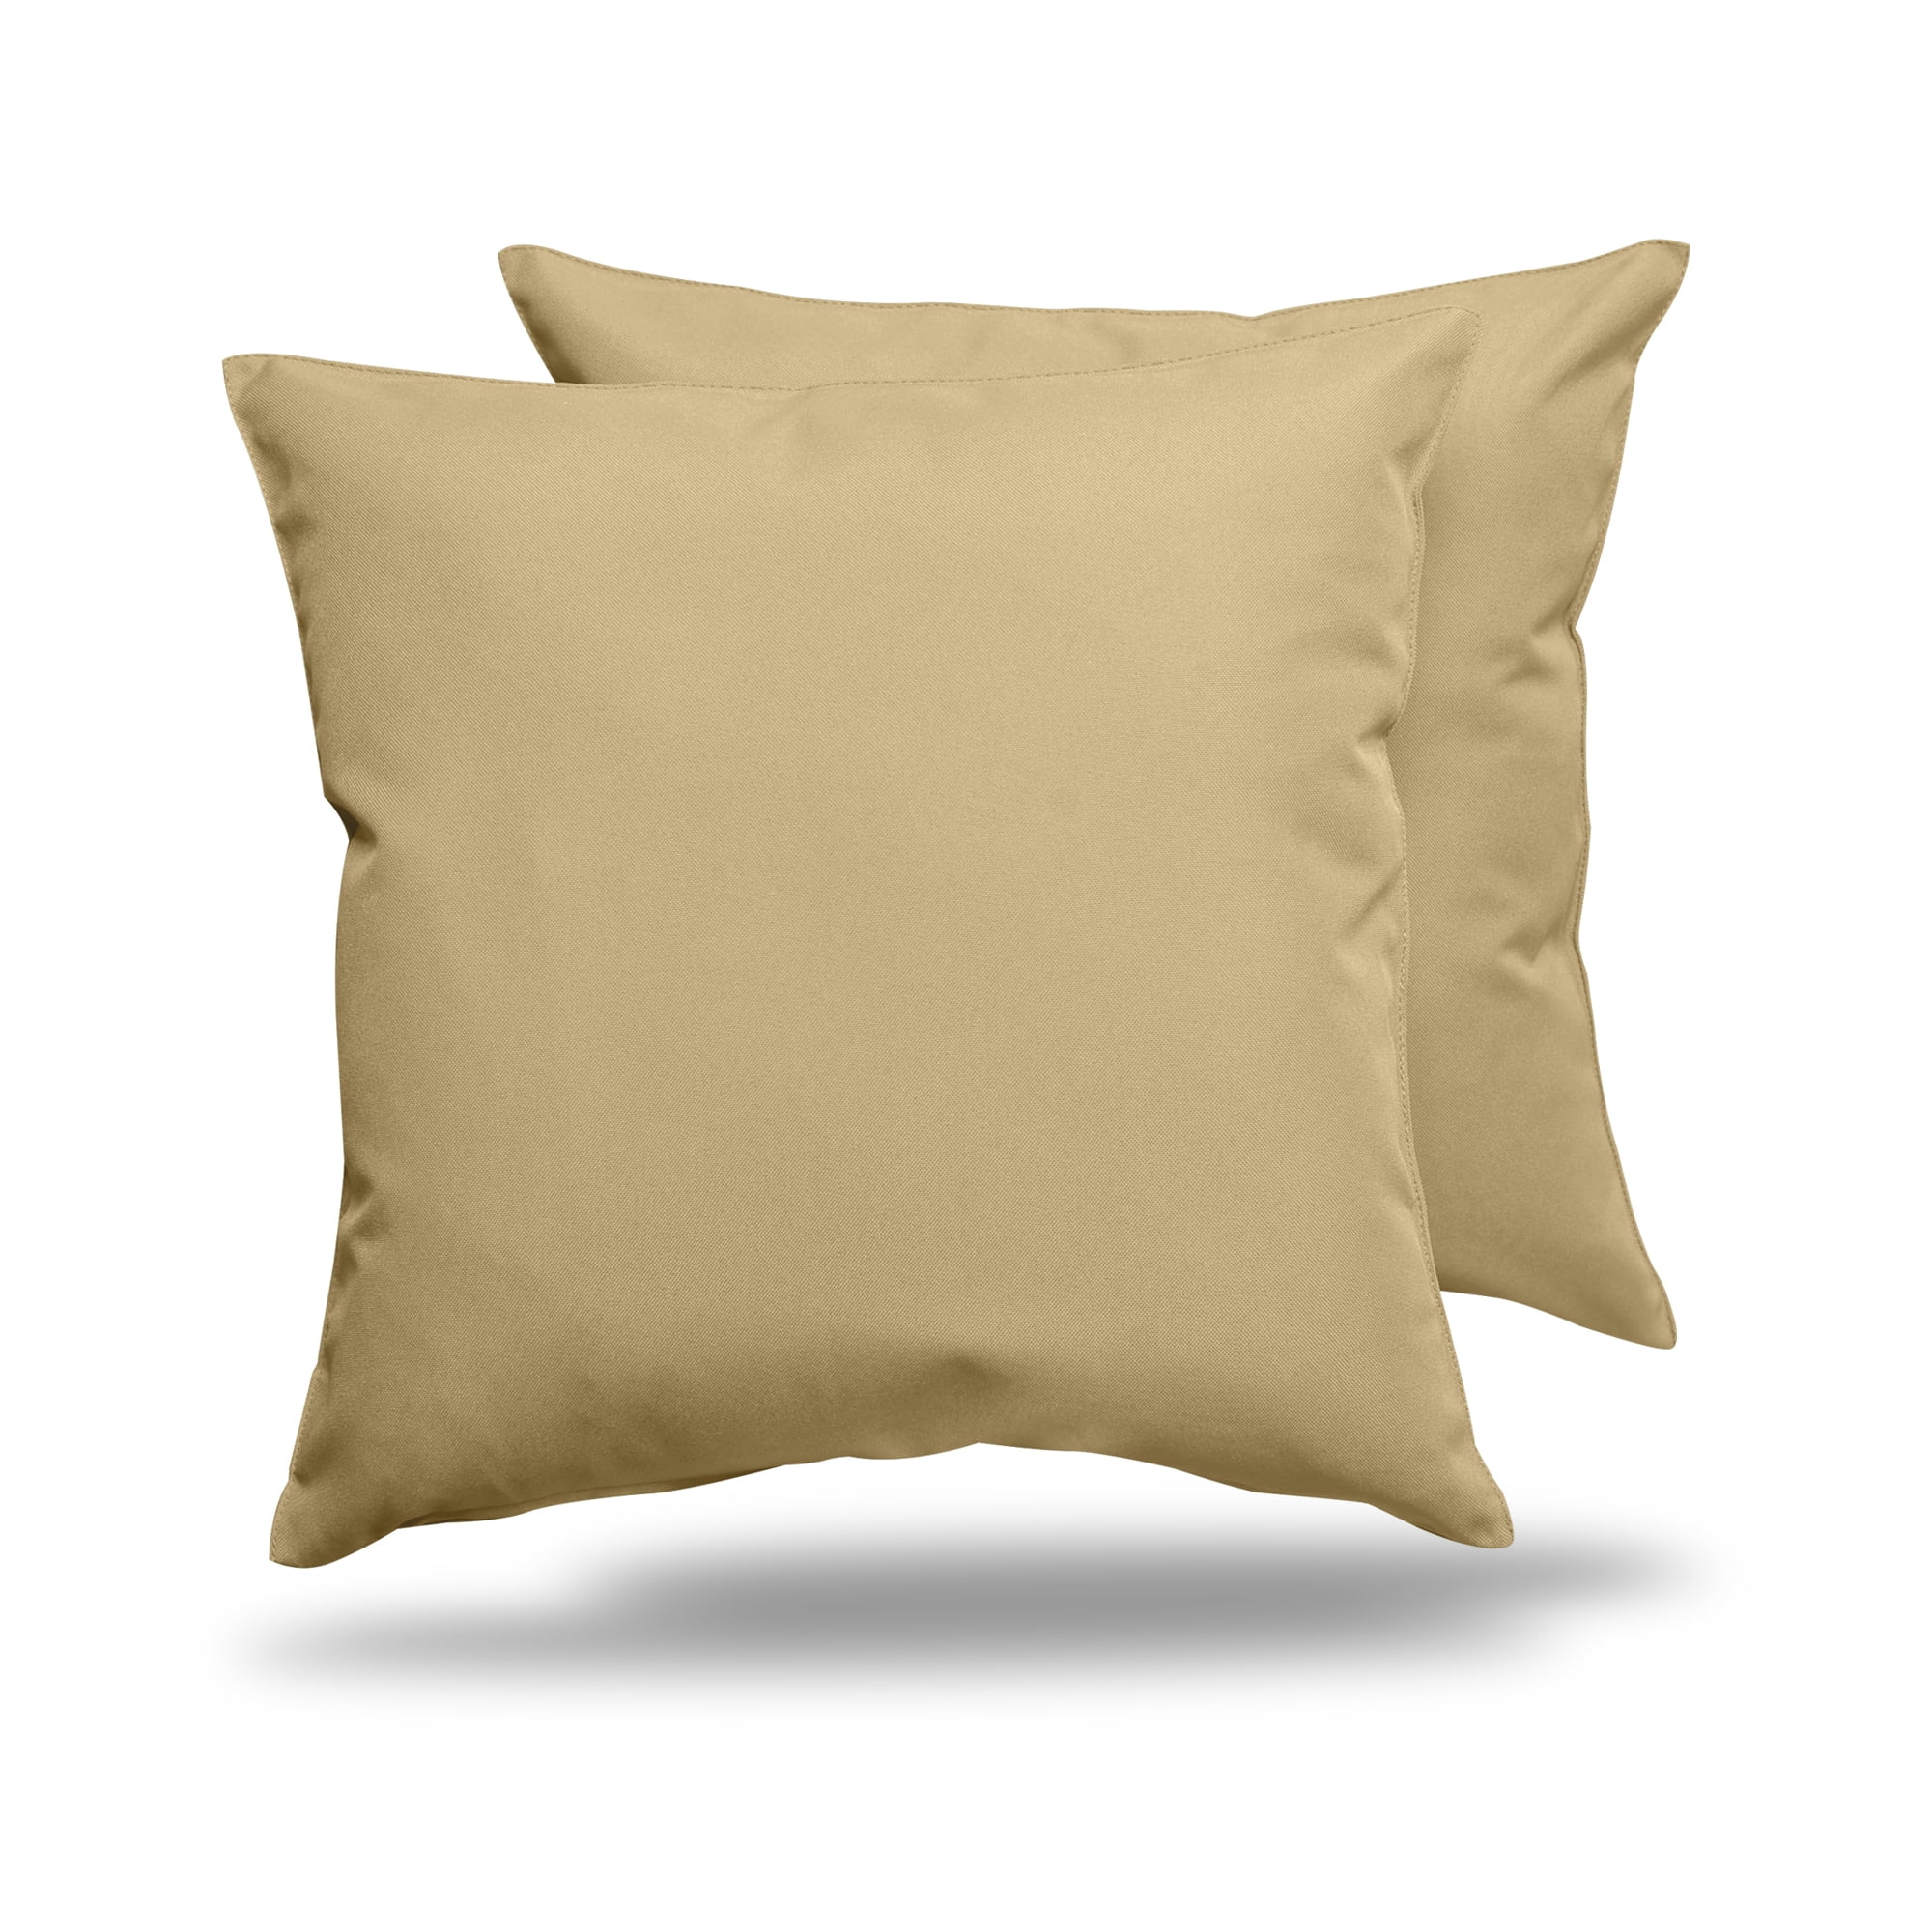 2Piece Outdoor Pillow Covers 18 x 18 inch Patio Decorative Square Throw Pillow Covers (18" x 18